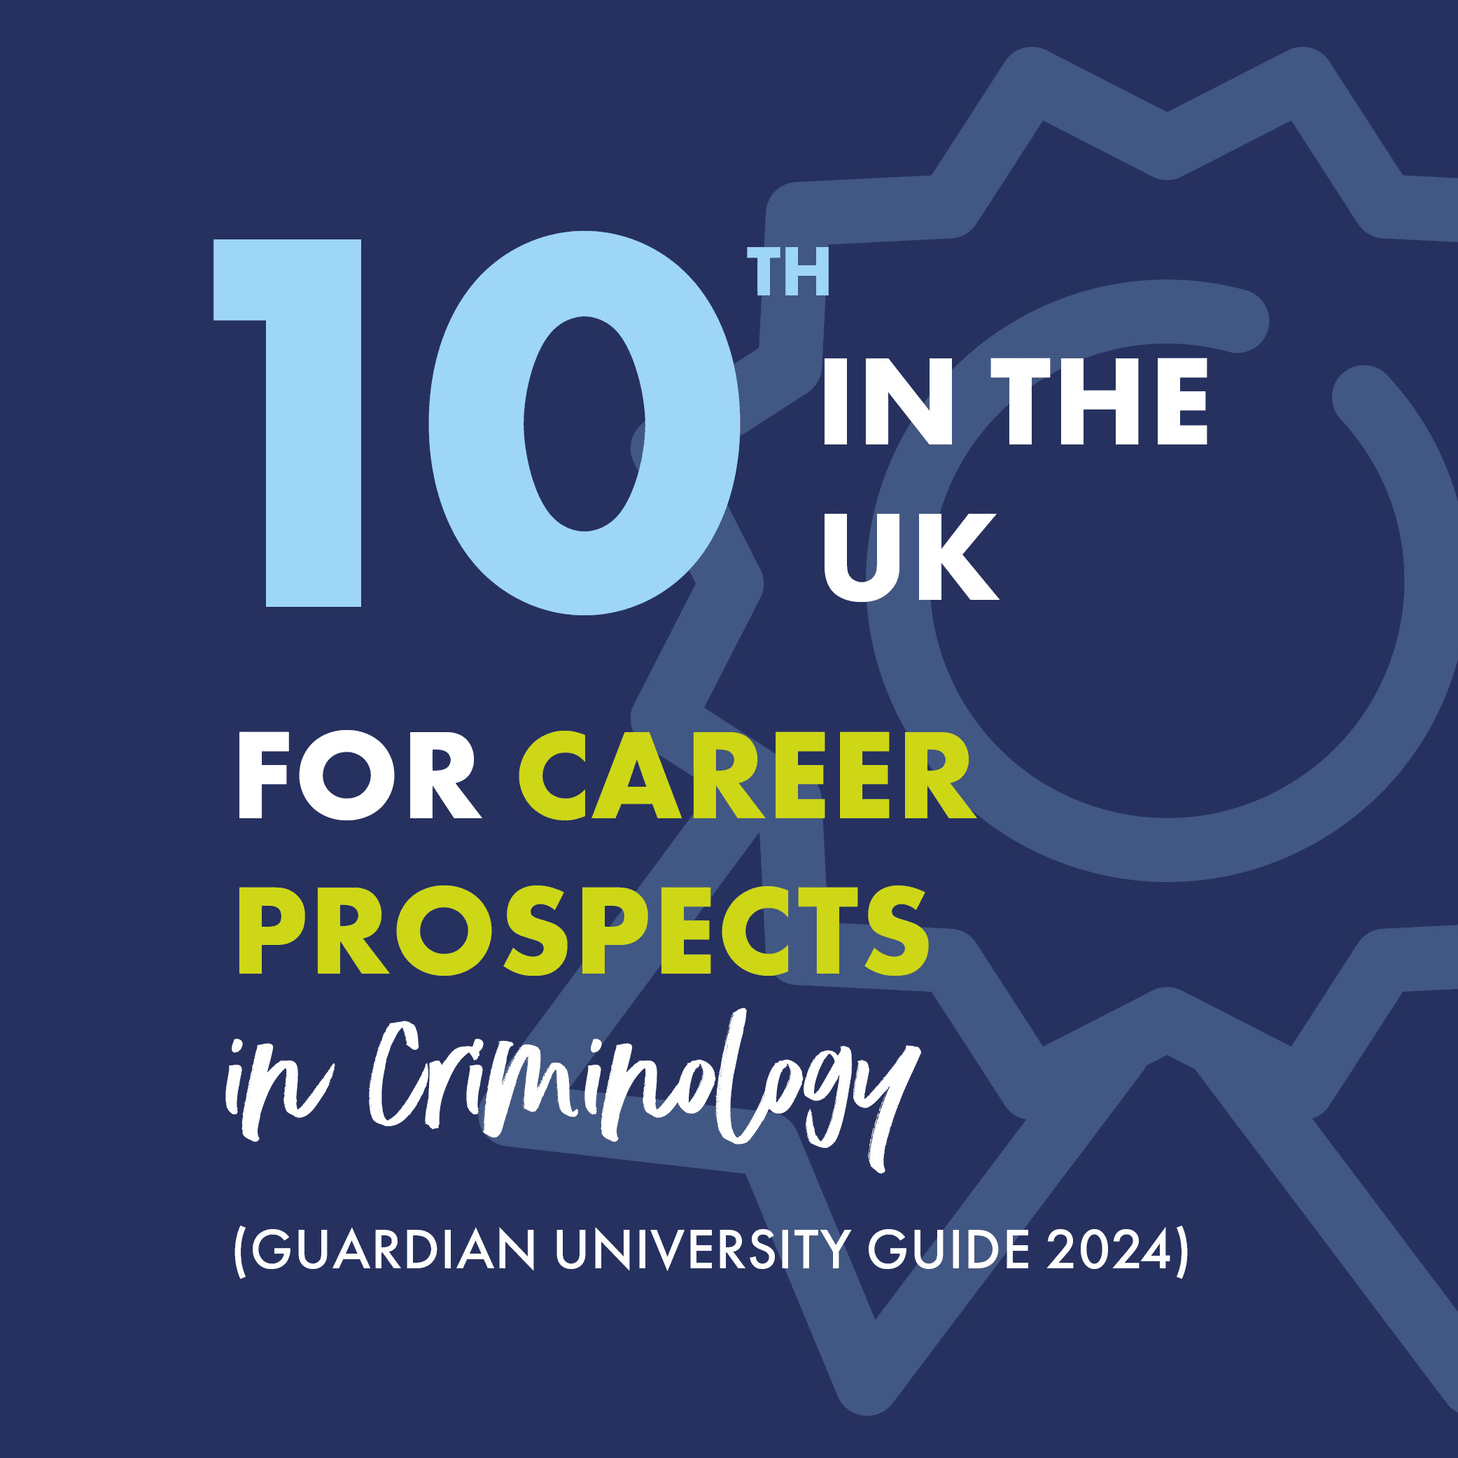 Criminology is ranked 10th for Career Prospects